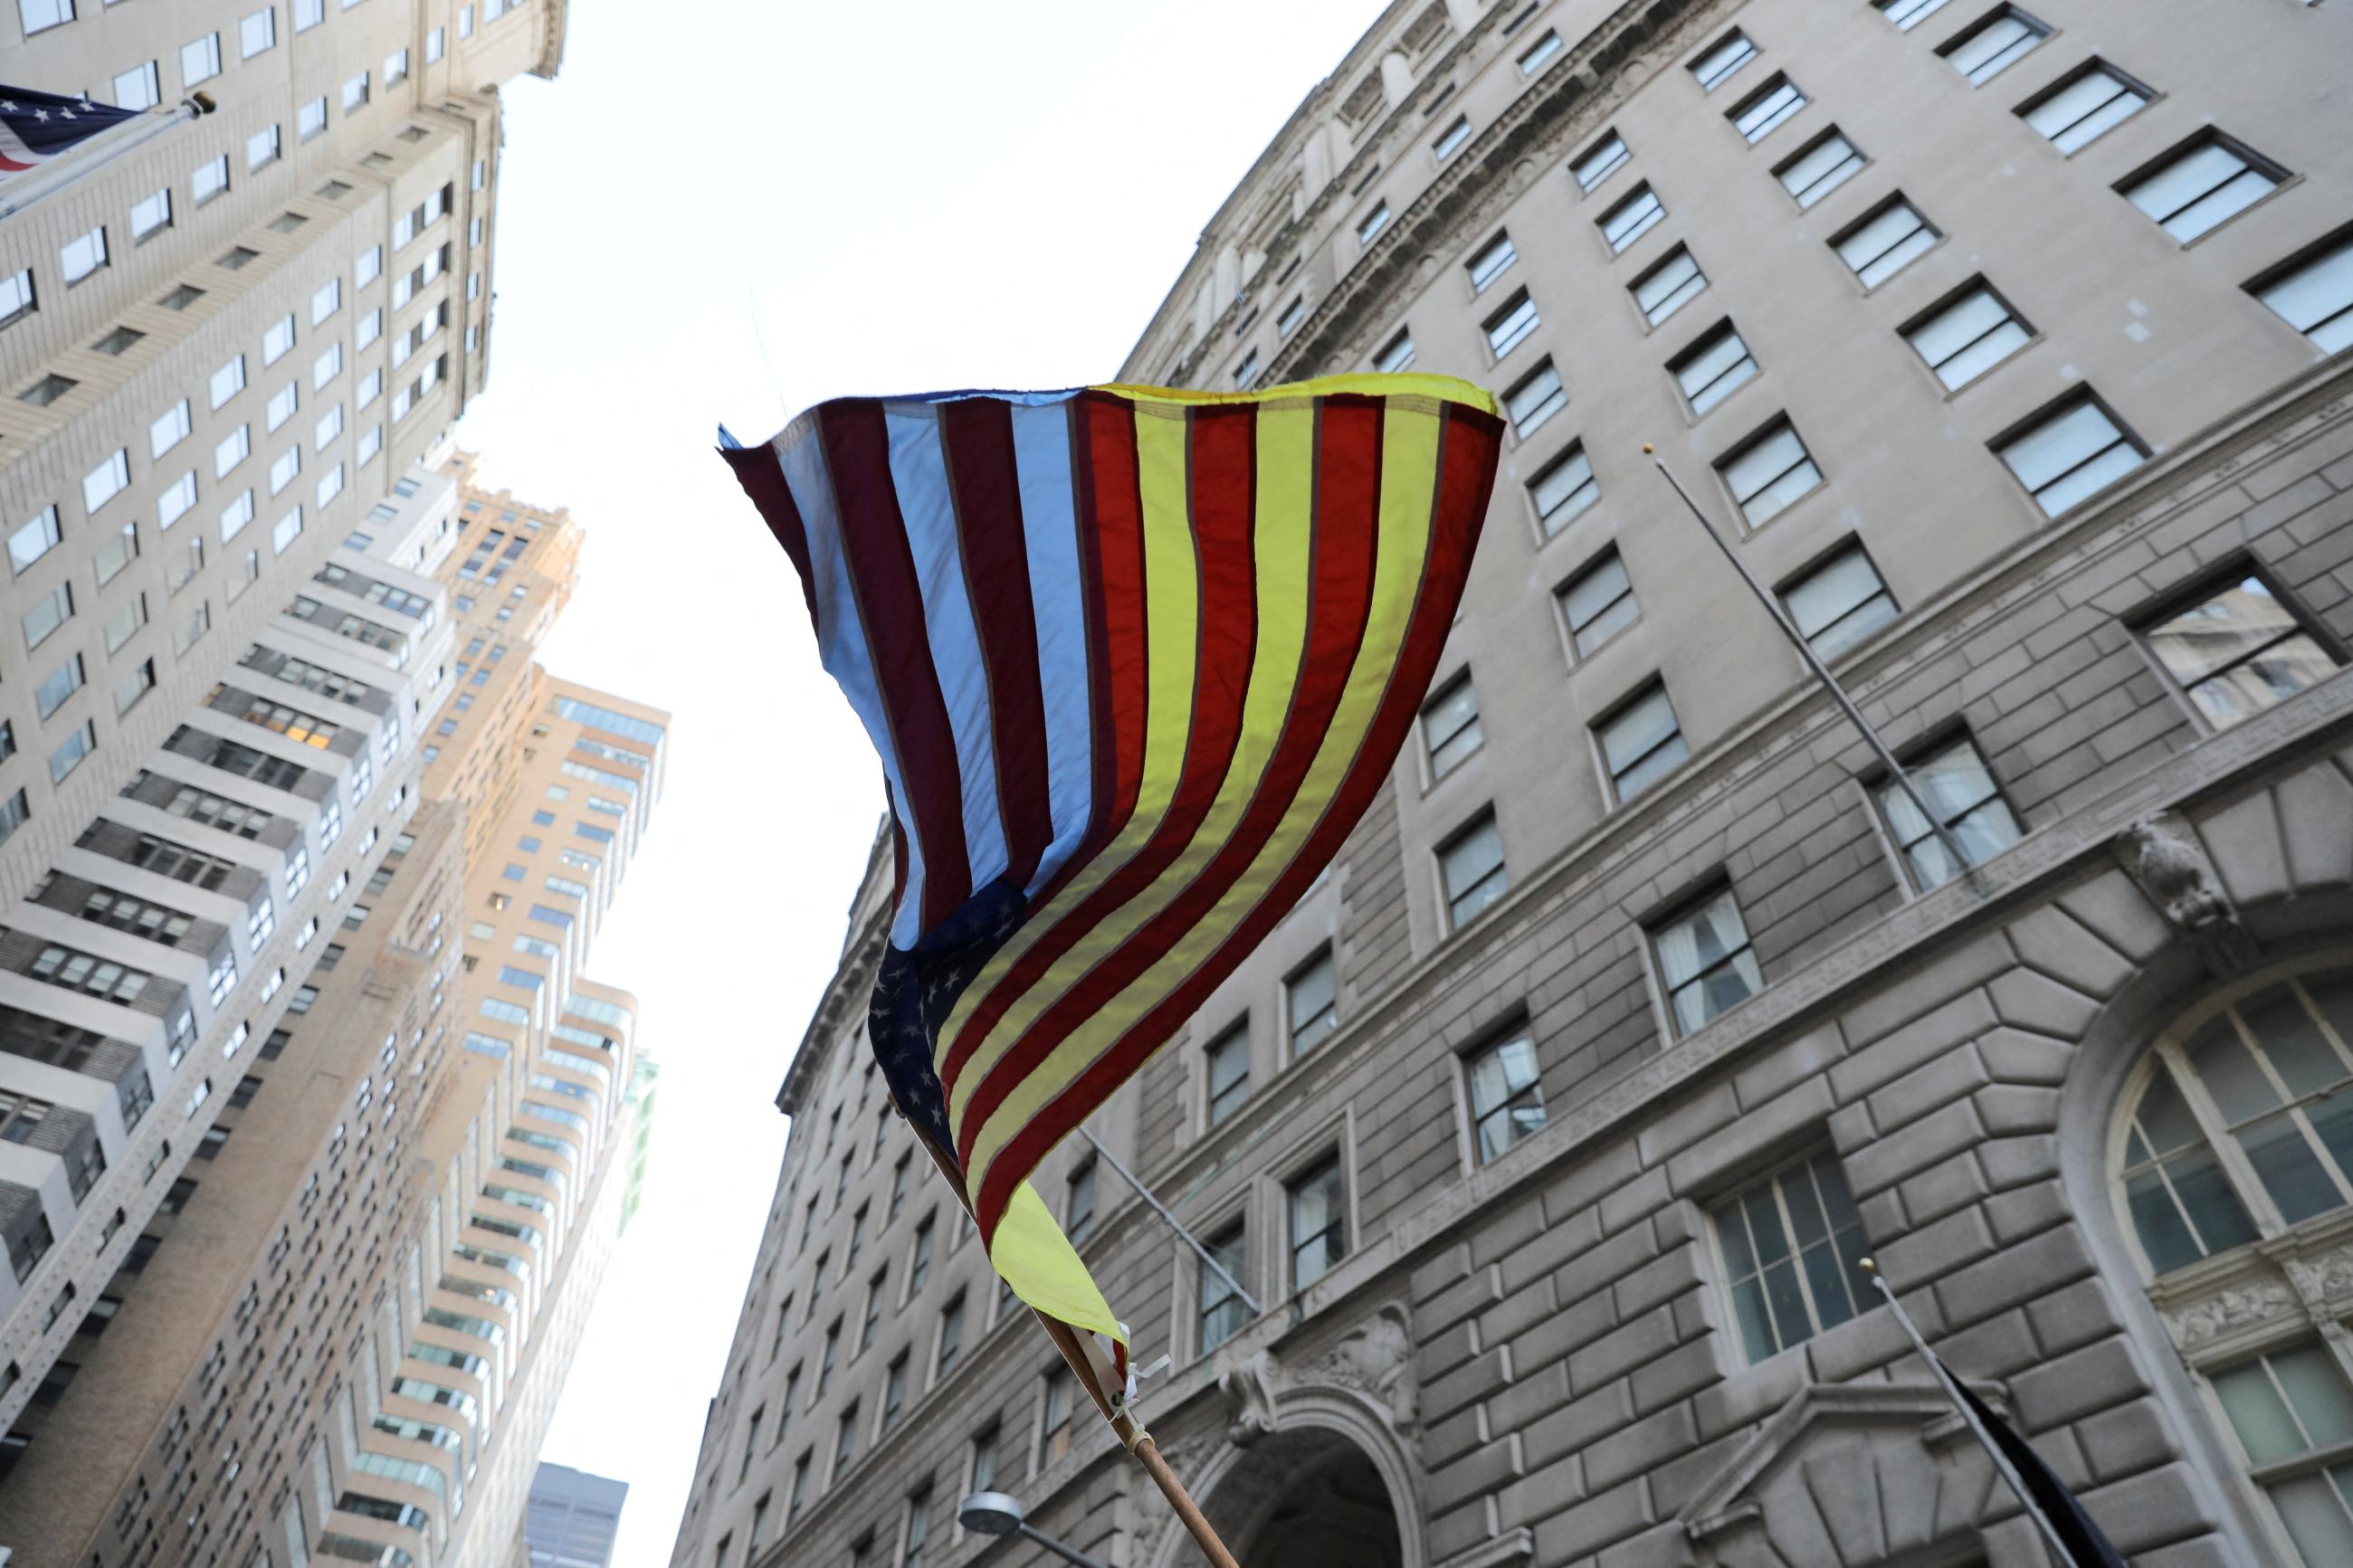 An American flag with yellow color is seen during the Ukrainian flag raising ceremony to commemorate one year since the Russian invasion of Ukraine, in New York City on February 23, 2023.